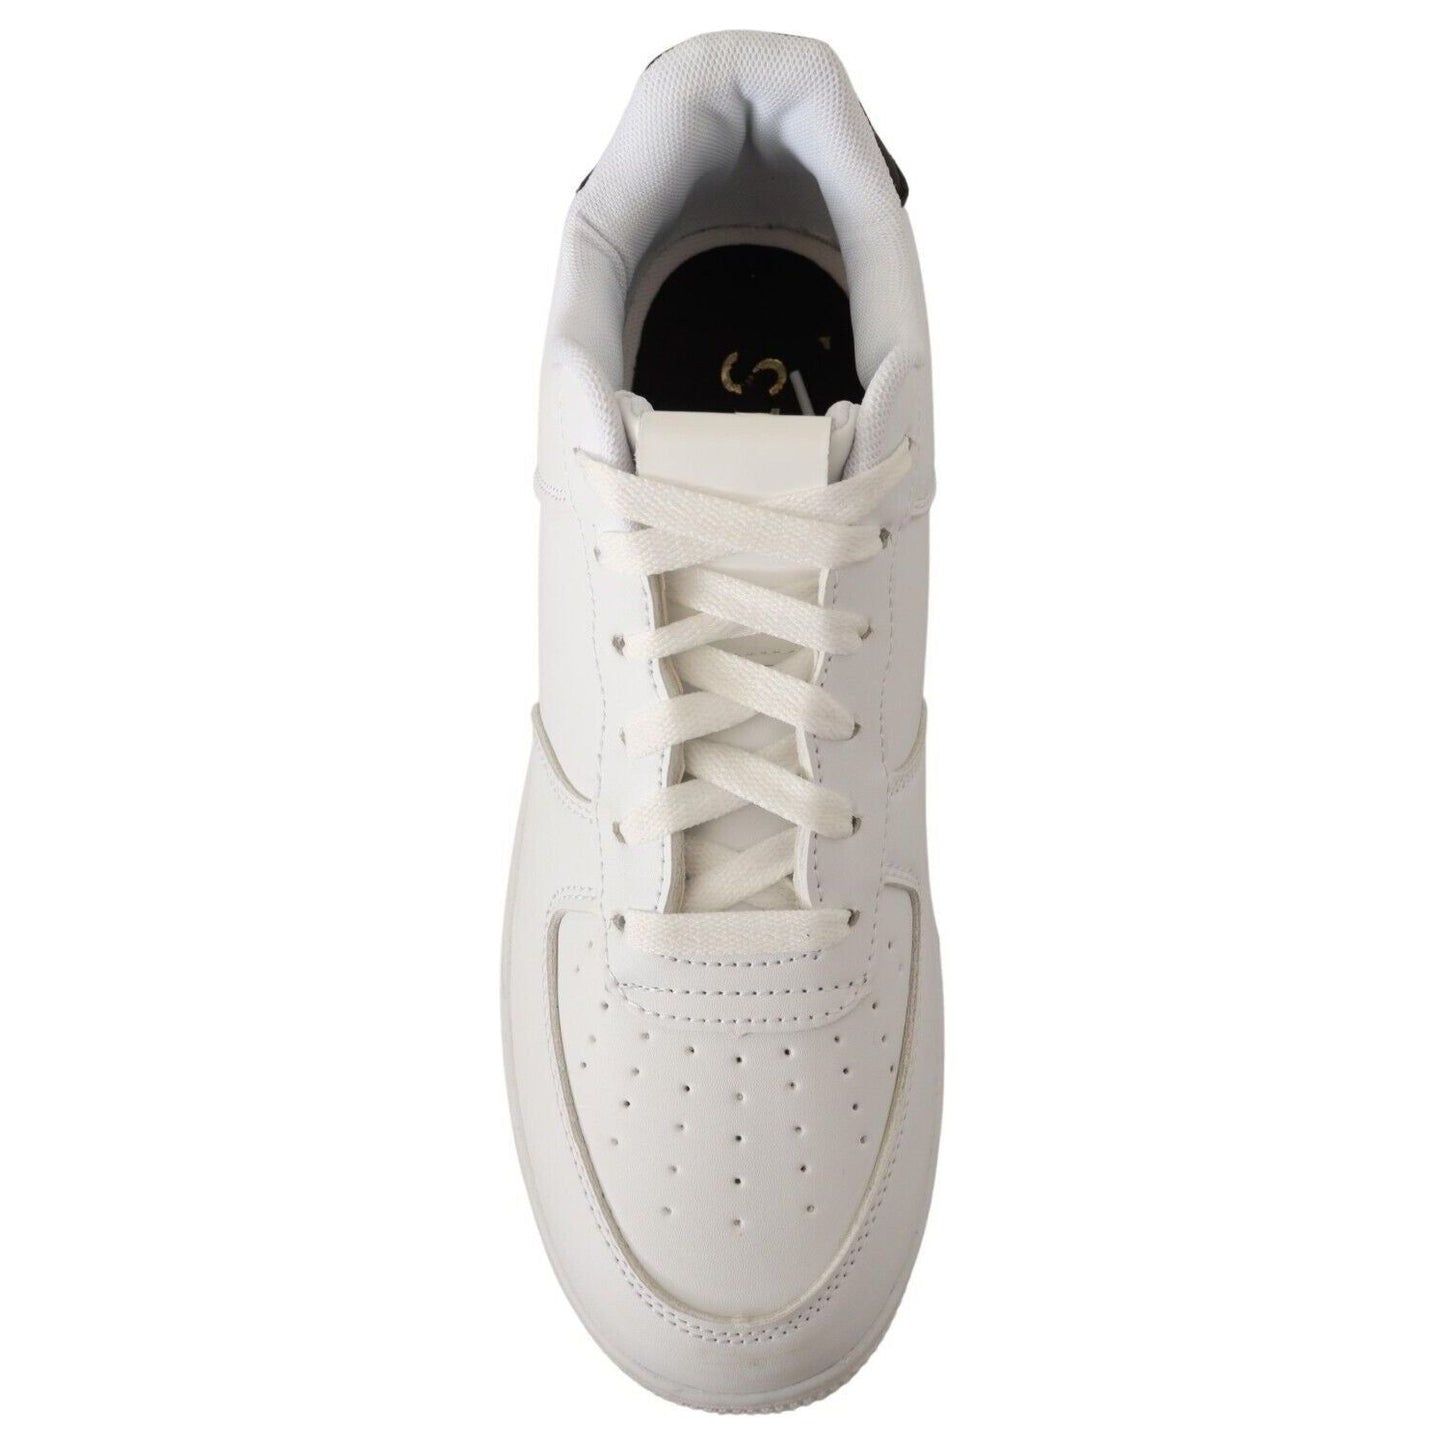 SIGNS Chic White Leather Low Top Sneakers MAN SNEAKERS white-leather-perforated-lace-up-sneakers-casual-men-shoes s-l1600-3-129-843e785e-1b0.jpg